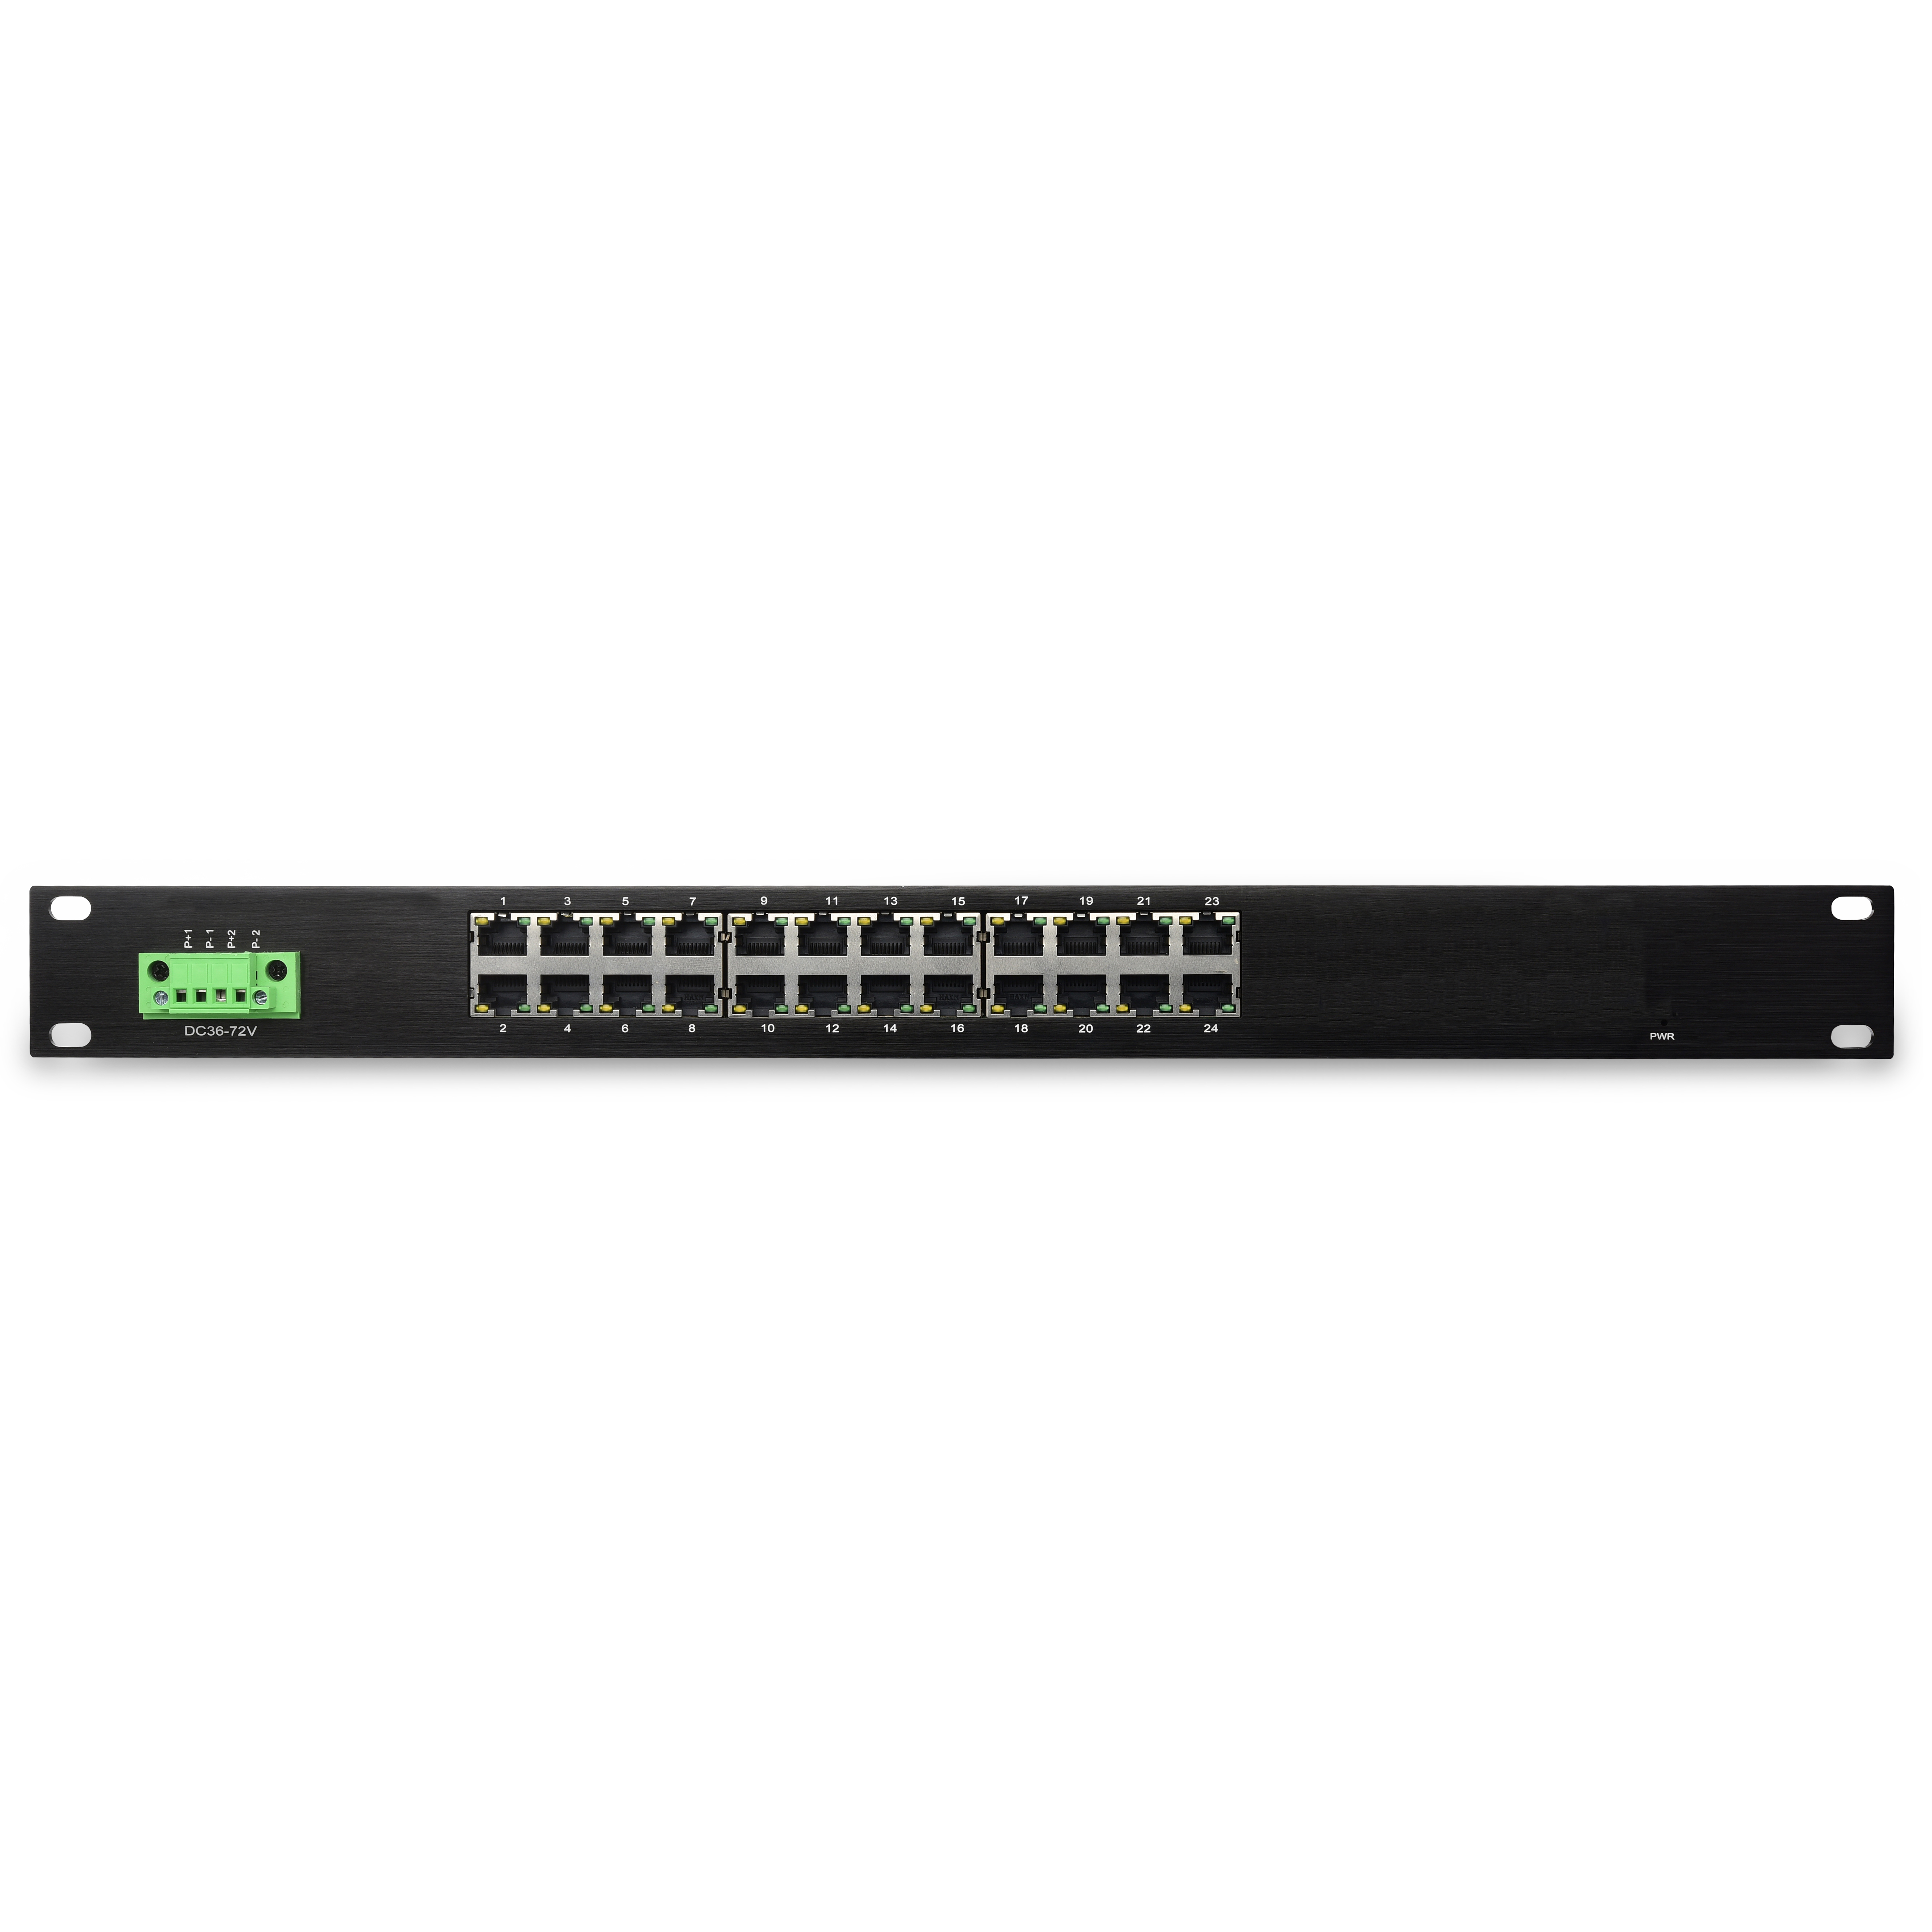 24 10/100/1000TX | Unmanaged Industrial Ethernet Switch JHA-IG024H Featured Image